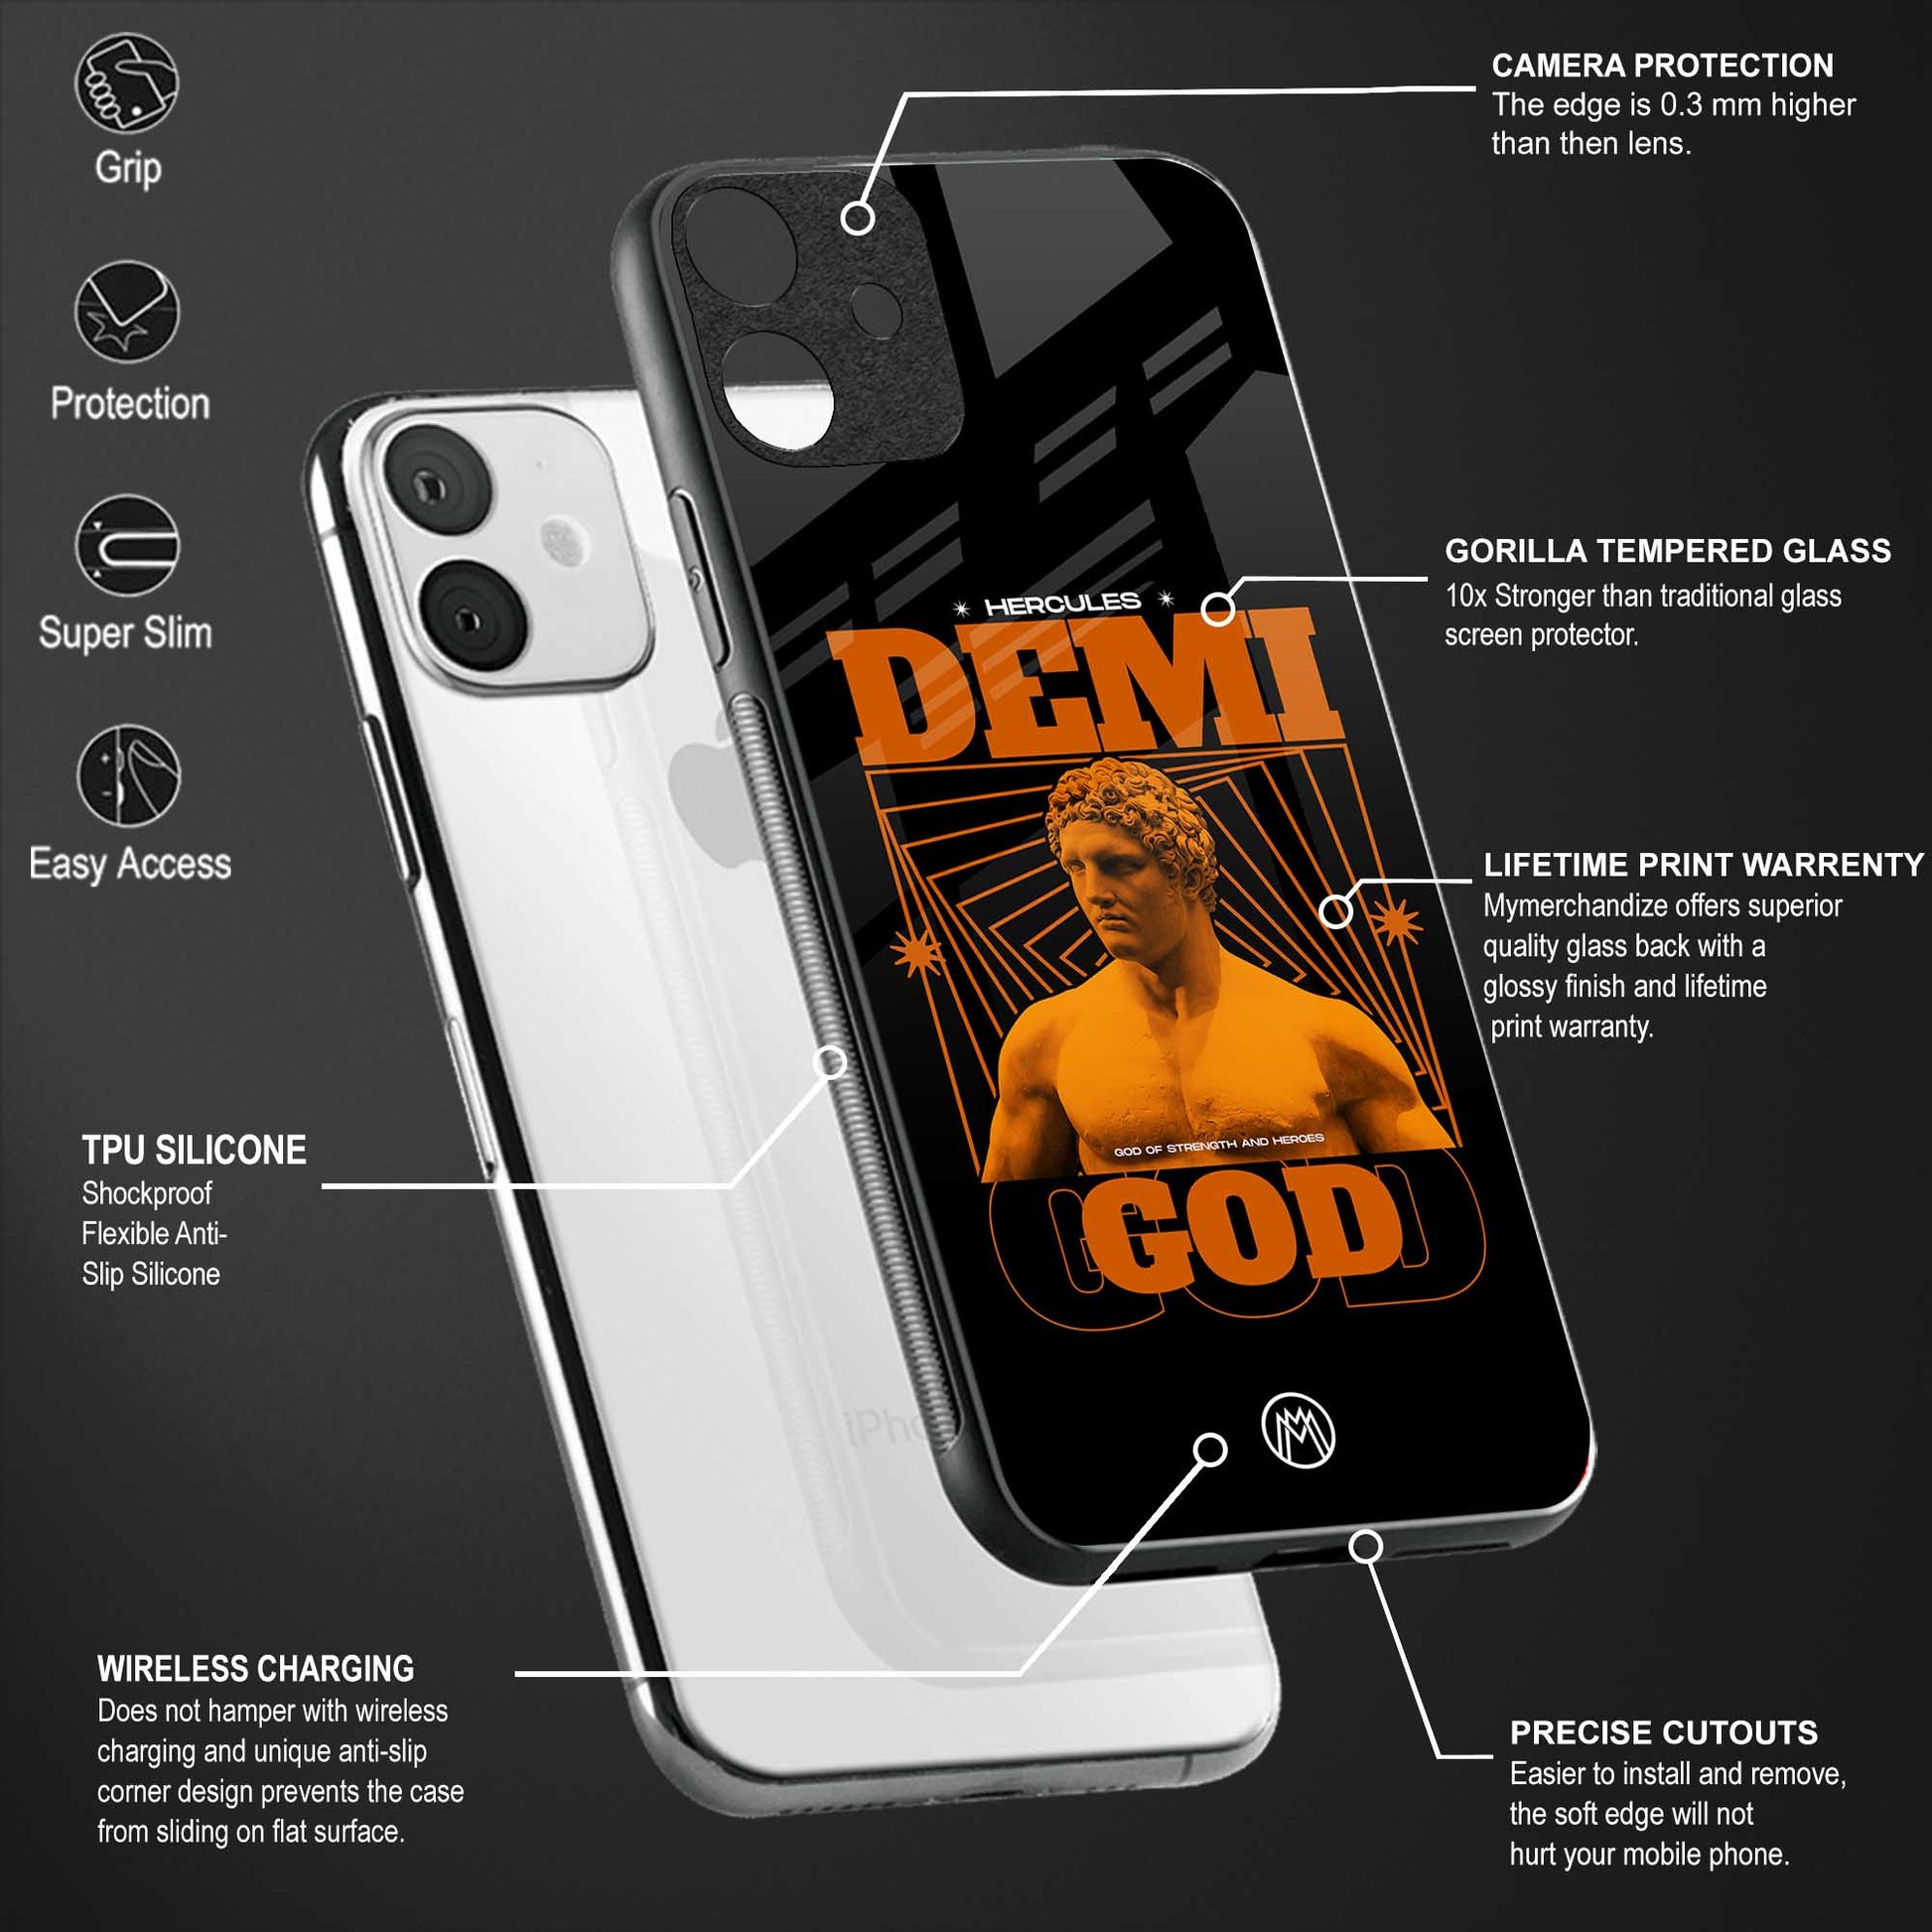 demi god back phone cover | glass case for redmi note 11 pro plus 4g/5g